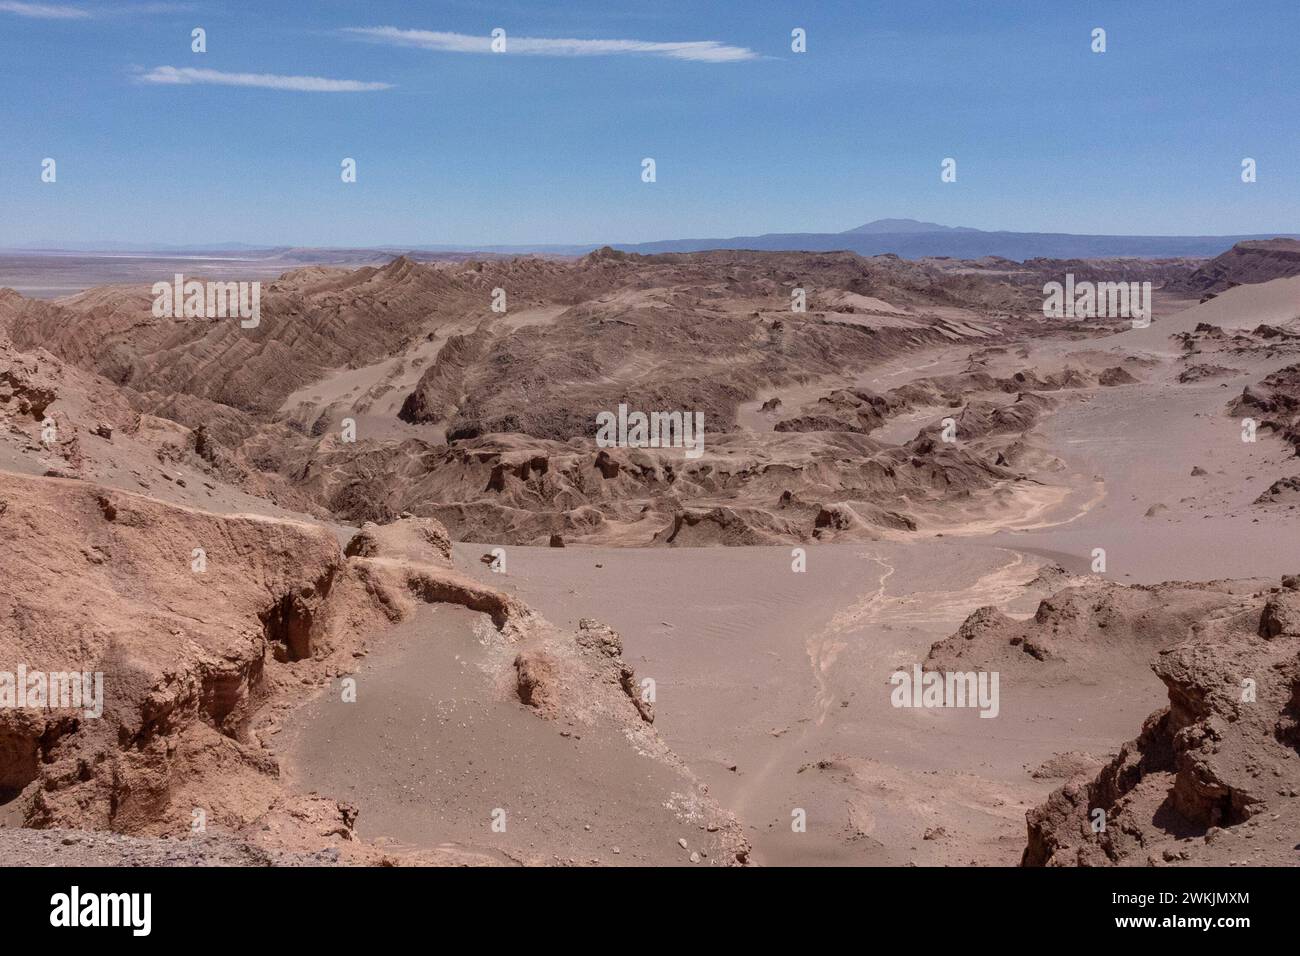 Valley of the moons (Valle de la Luna), Atacama Desert, Chile. Where the surface replicates that of the moon and is used for space exploration. Stock Photo